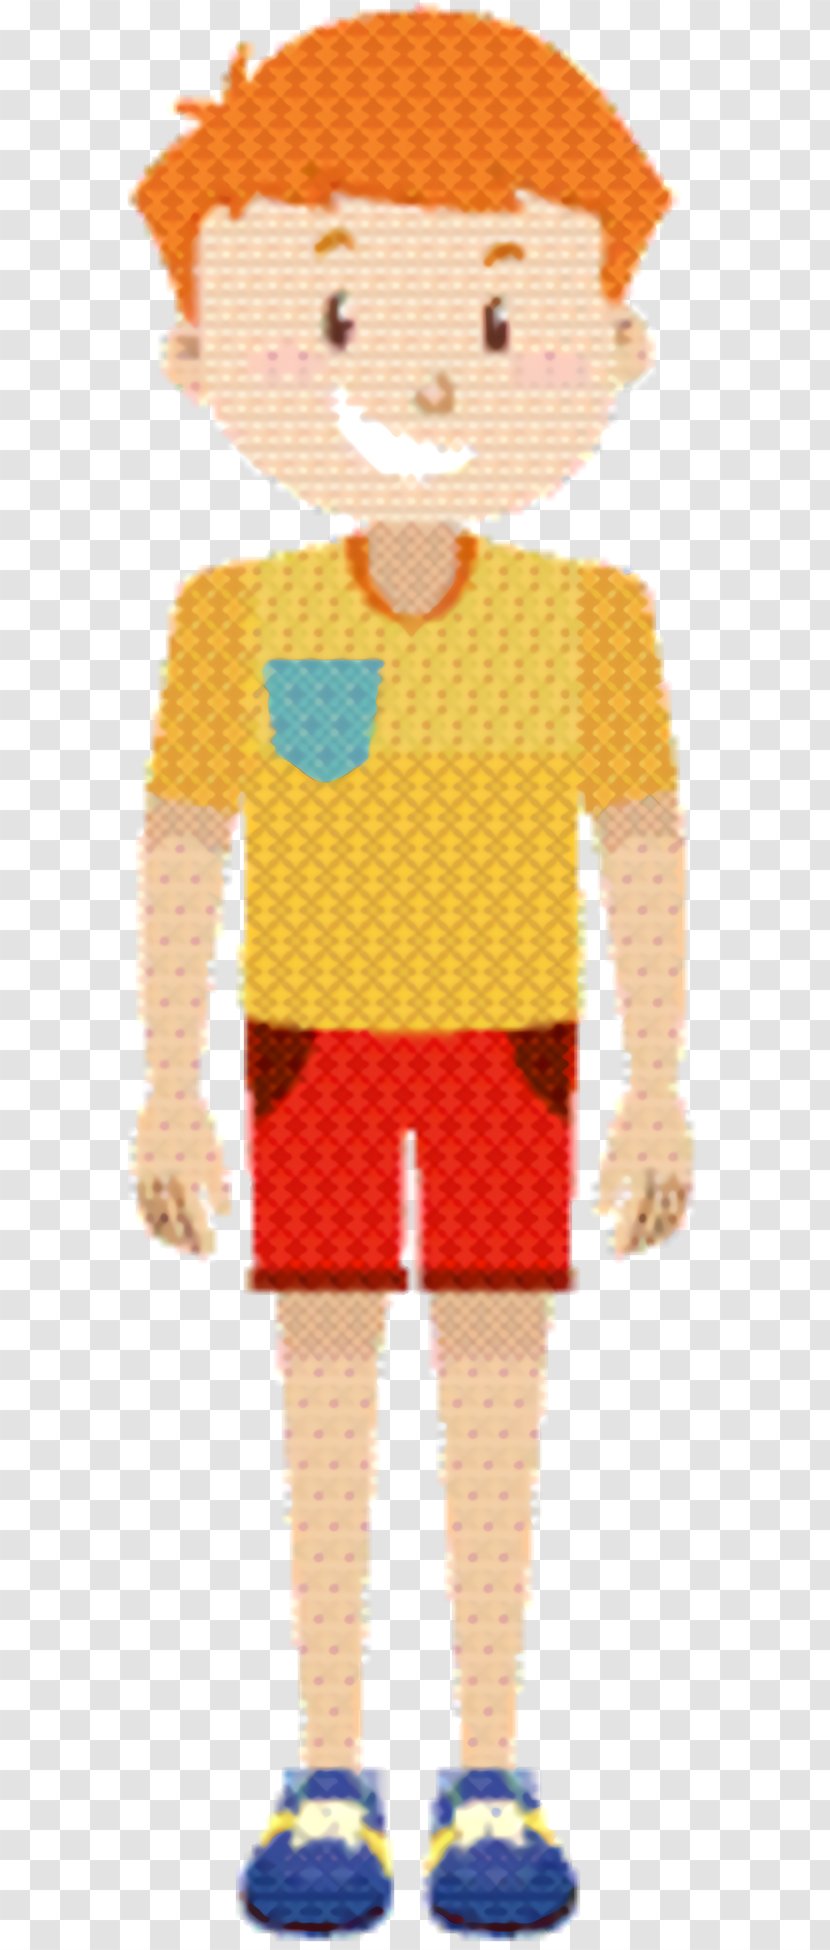 Yellow Background - Top - Wool Tshirt Transparent PNG